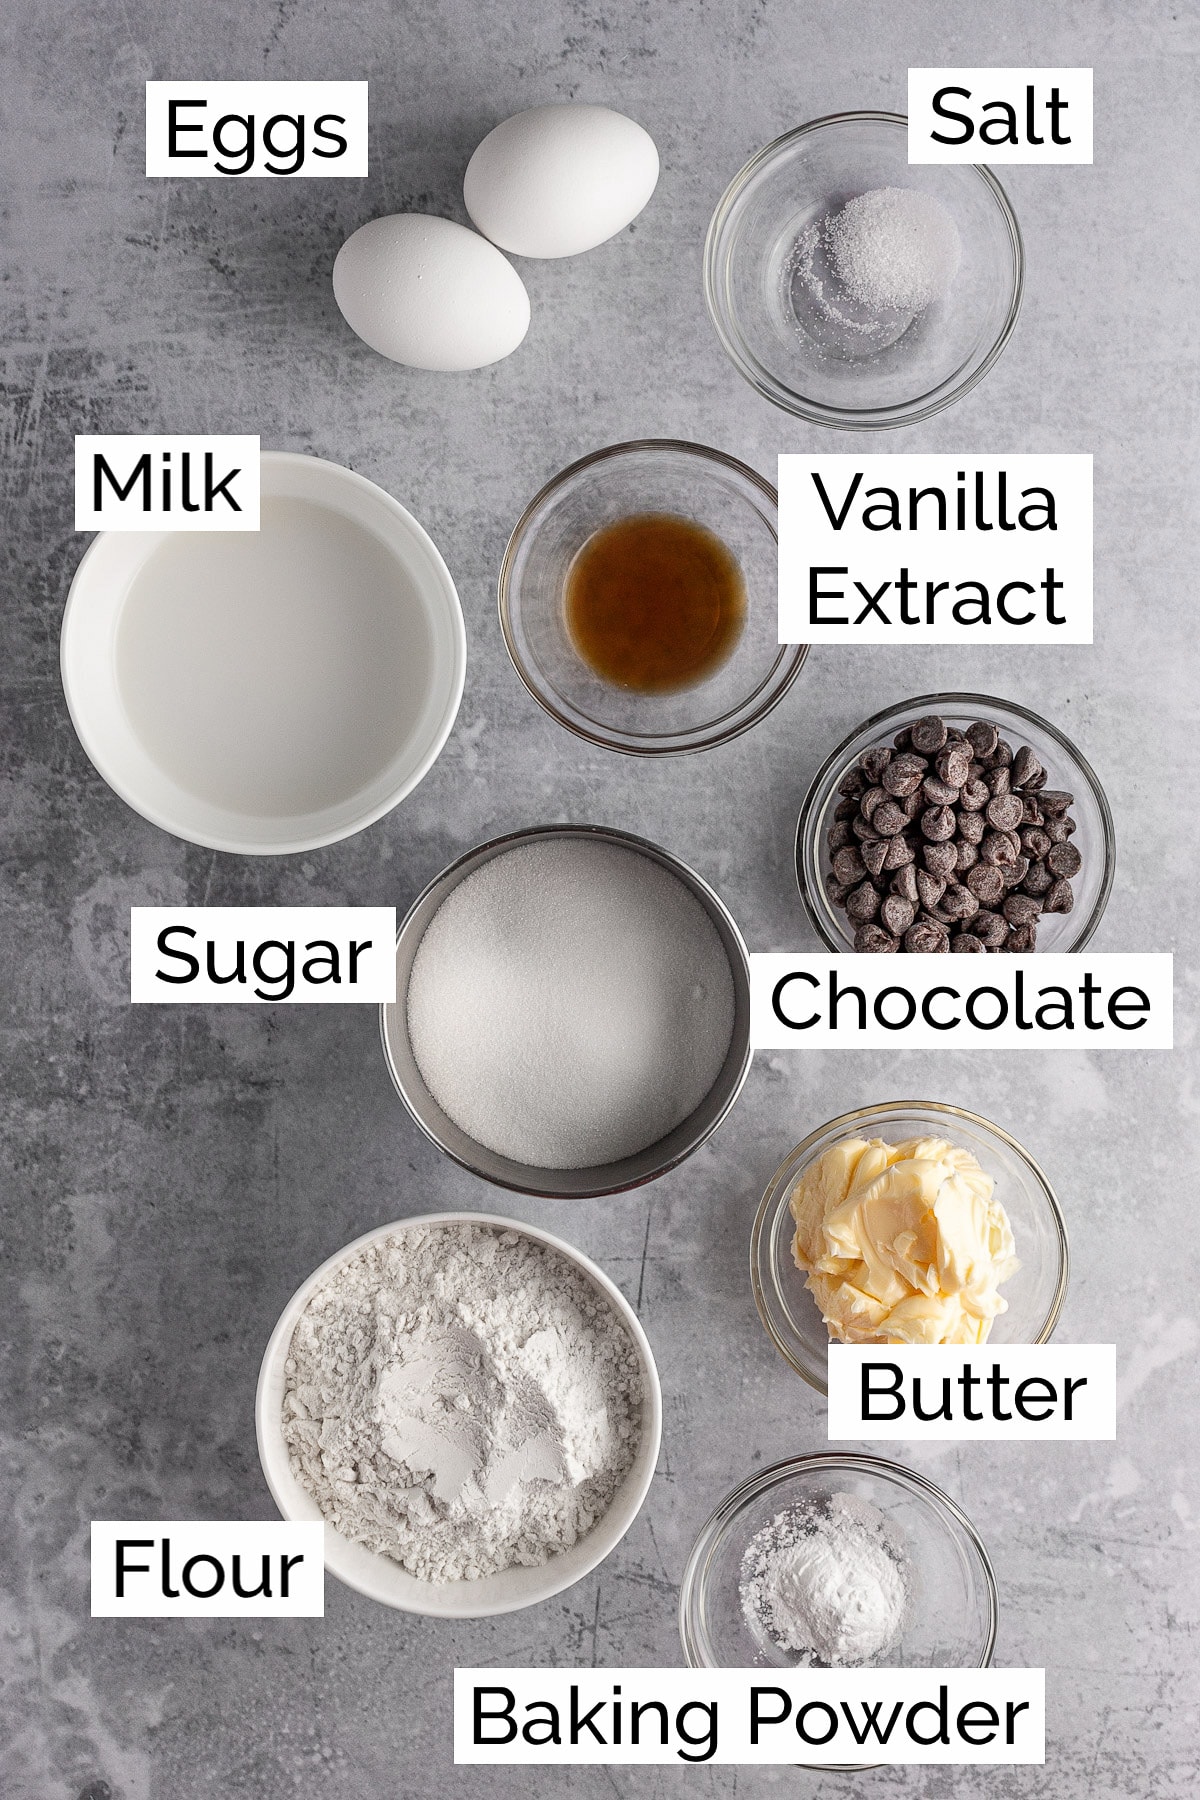 The ingredients needed to make a chocolate mini layered cake.